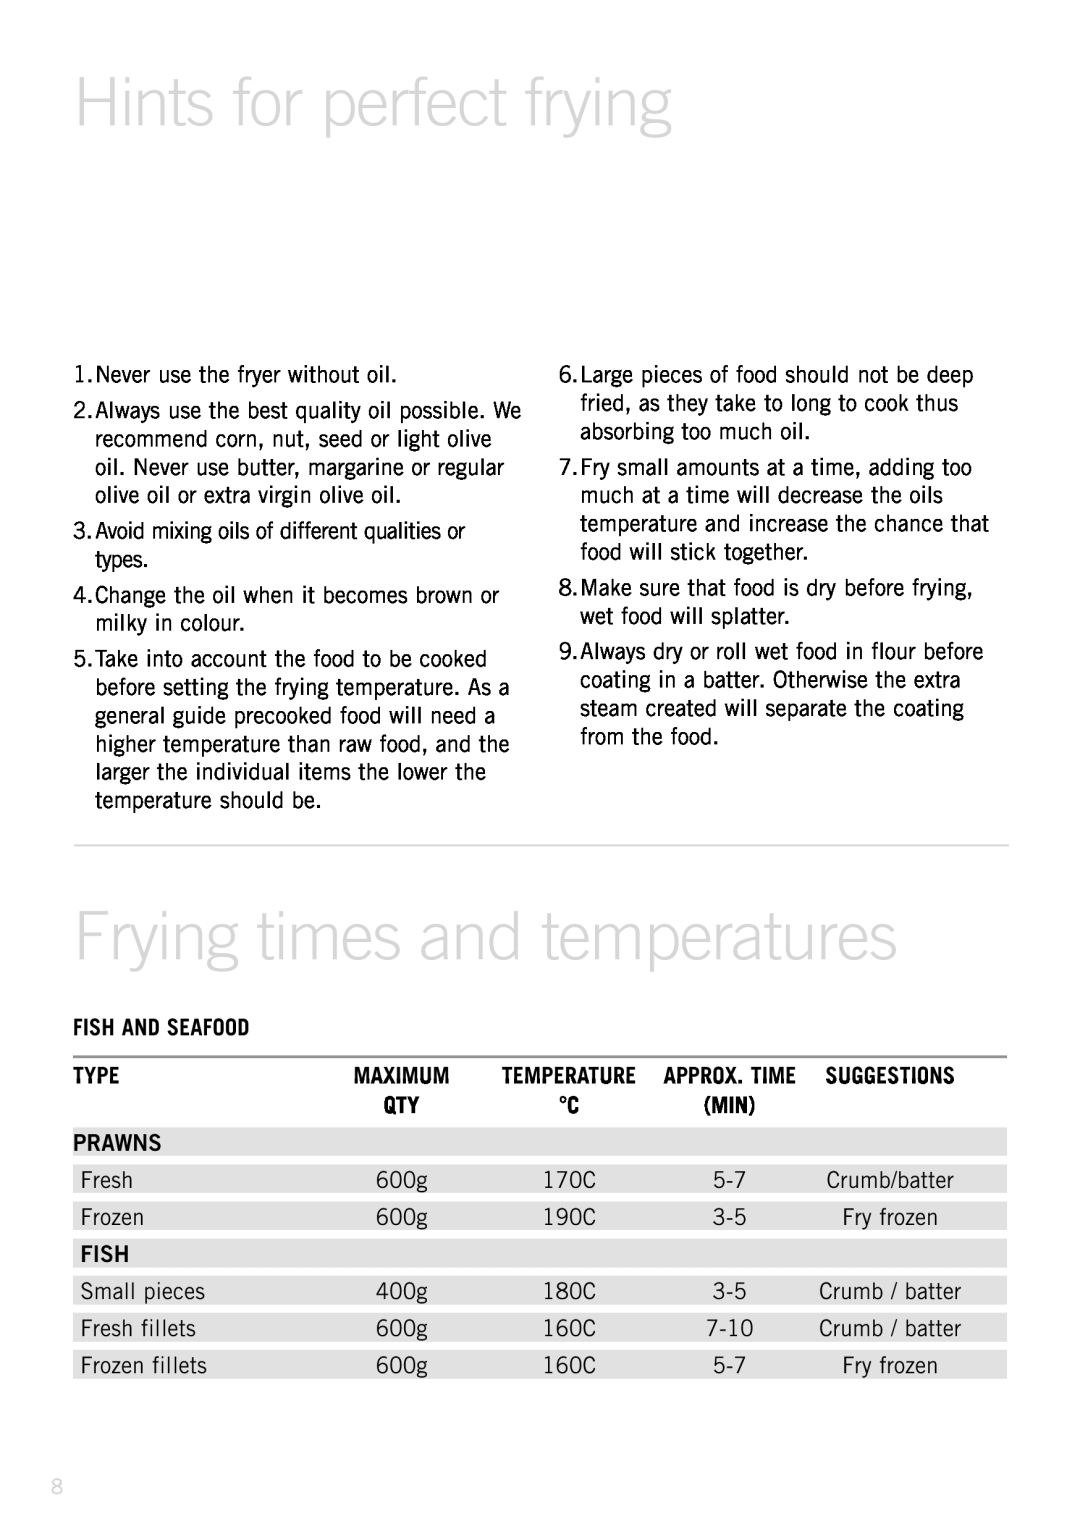 Sunbeam Deep Fryer manual Hints for perfect frying, Frying times and temperatures, Fish And Seafood, Type, Prawns 